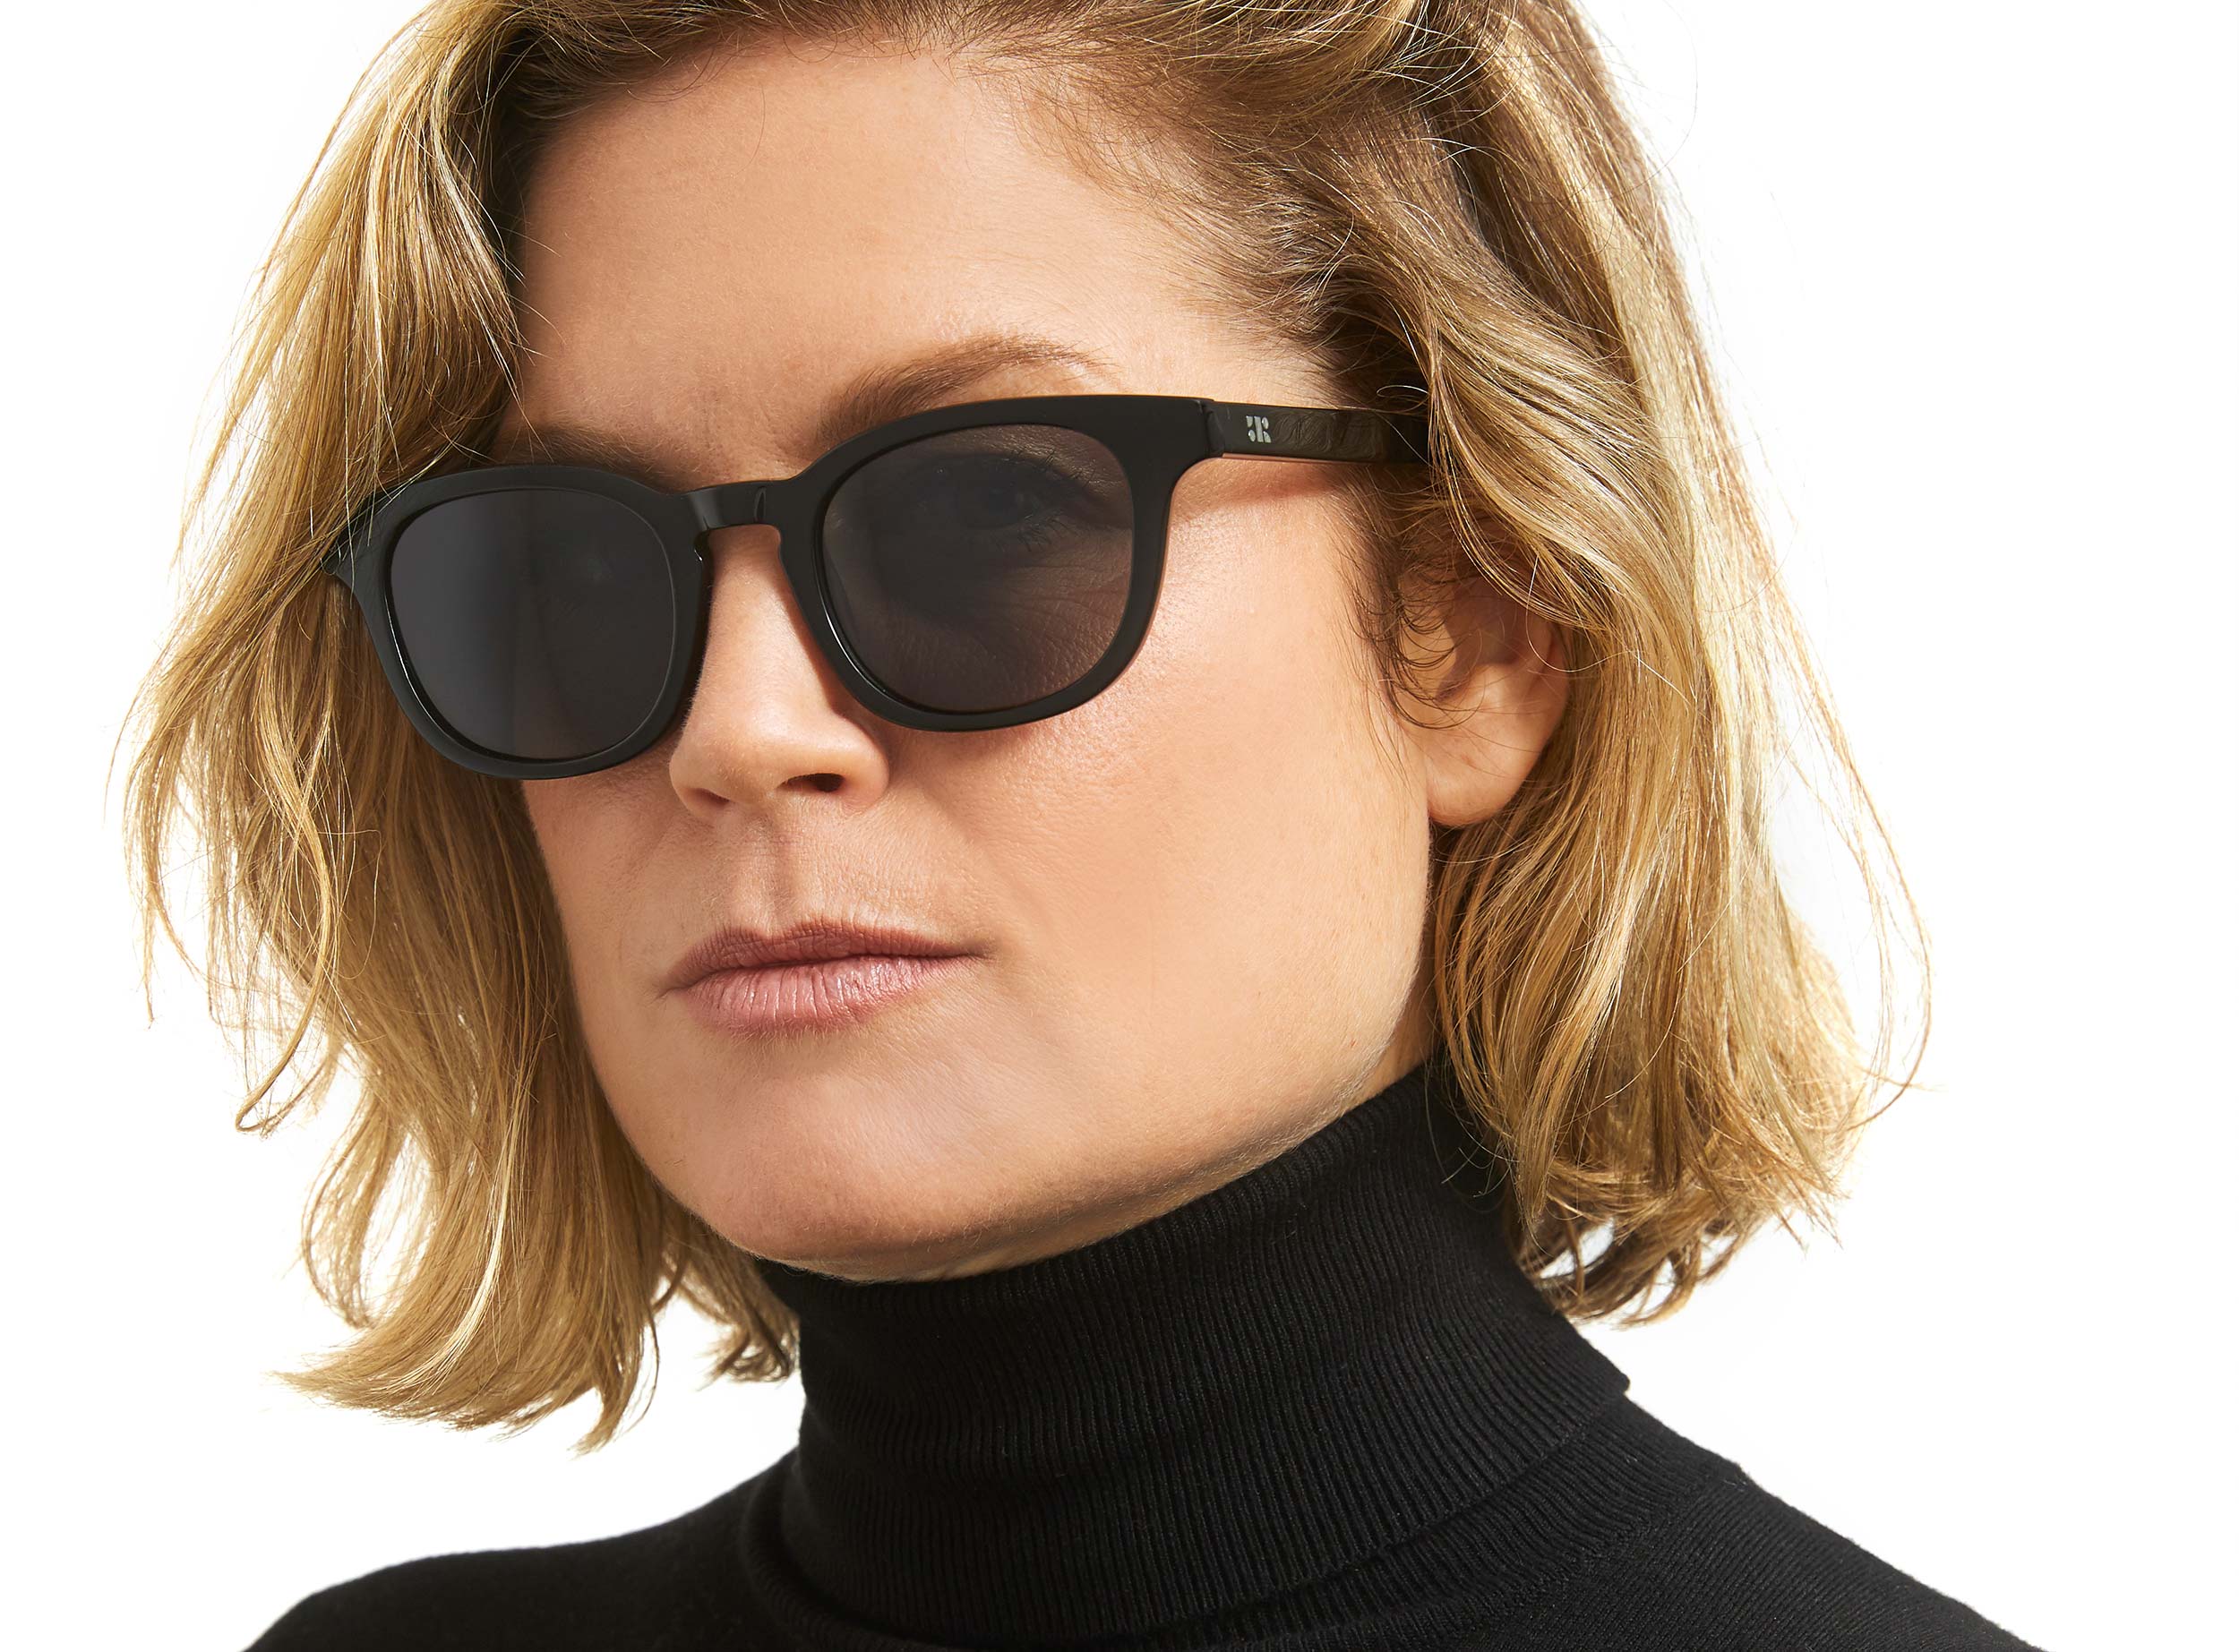 Photo of a man or woman wearing Sinclair Sun Black Sun Glasses by French Kiwis